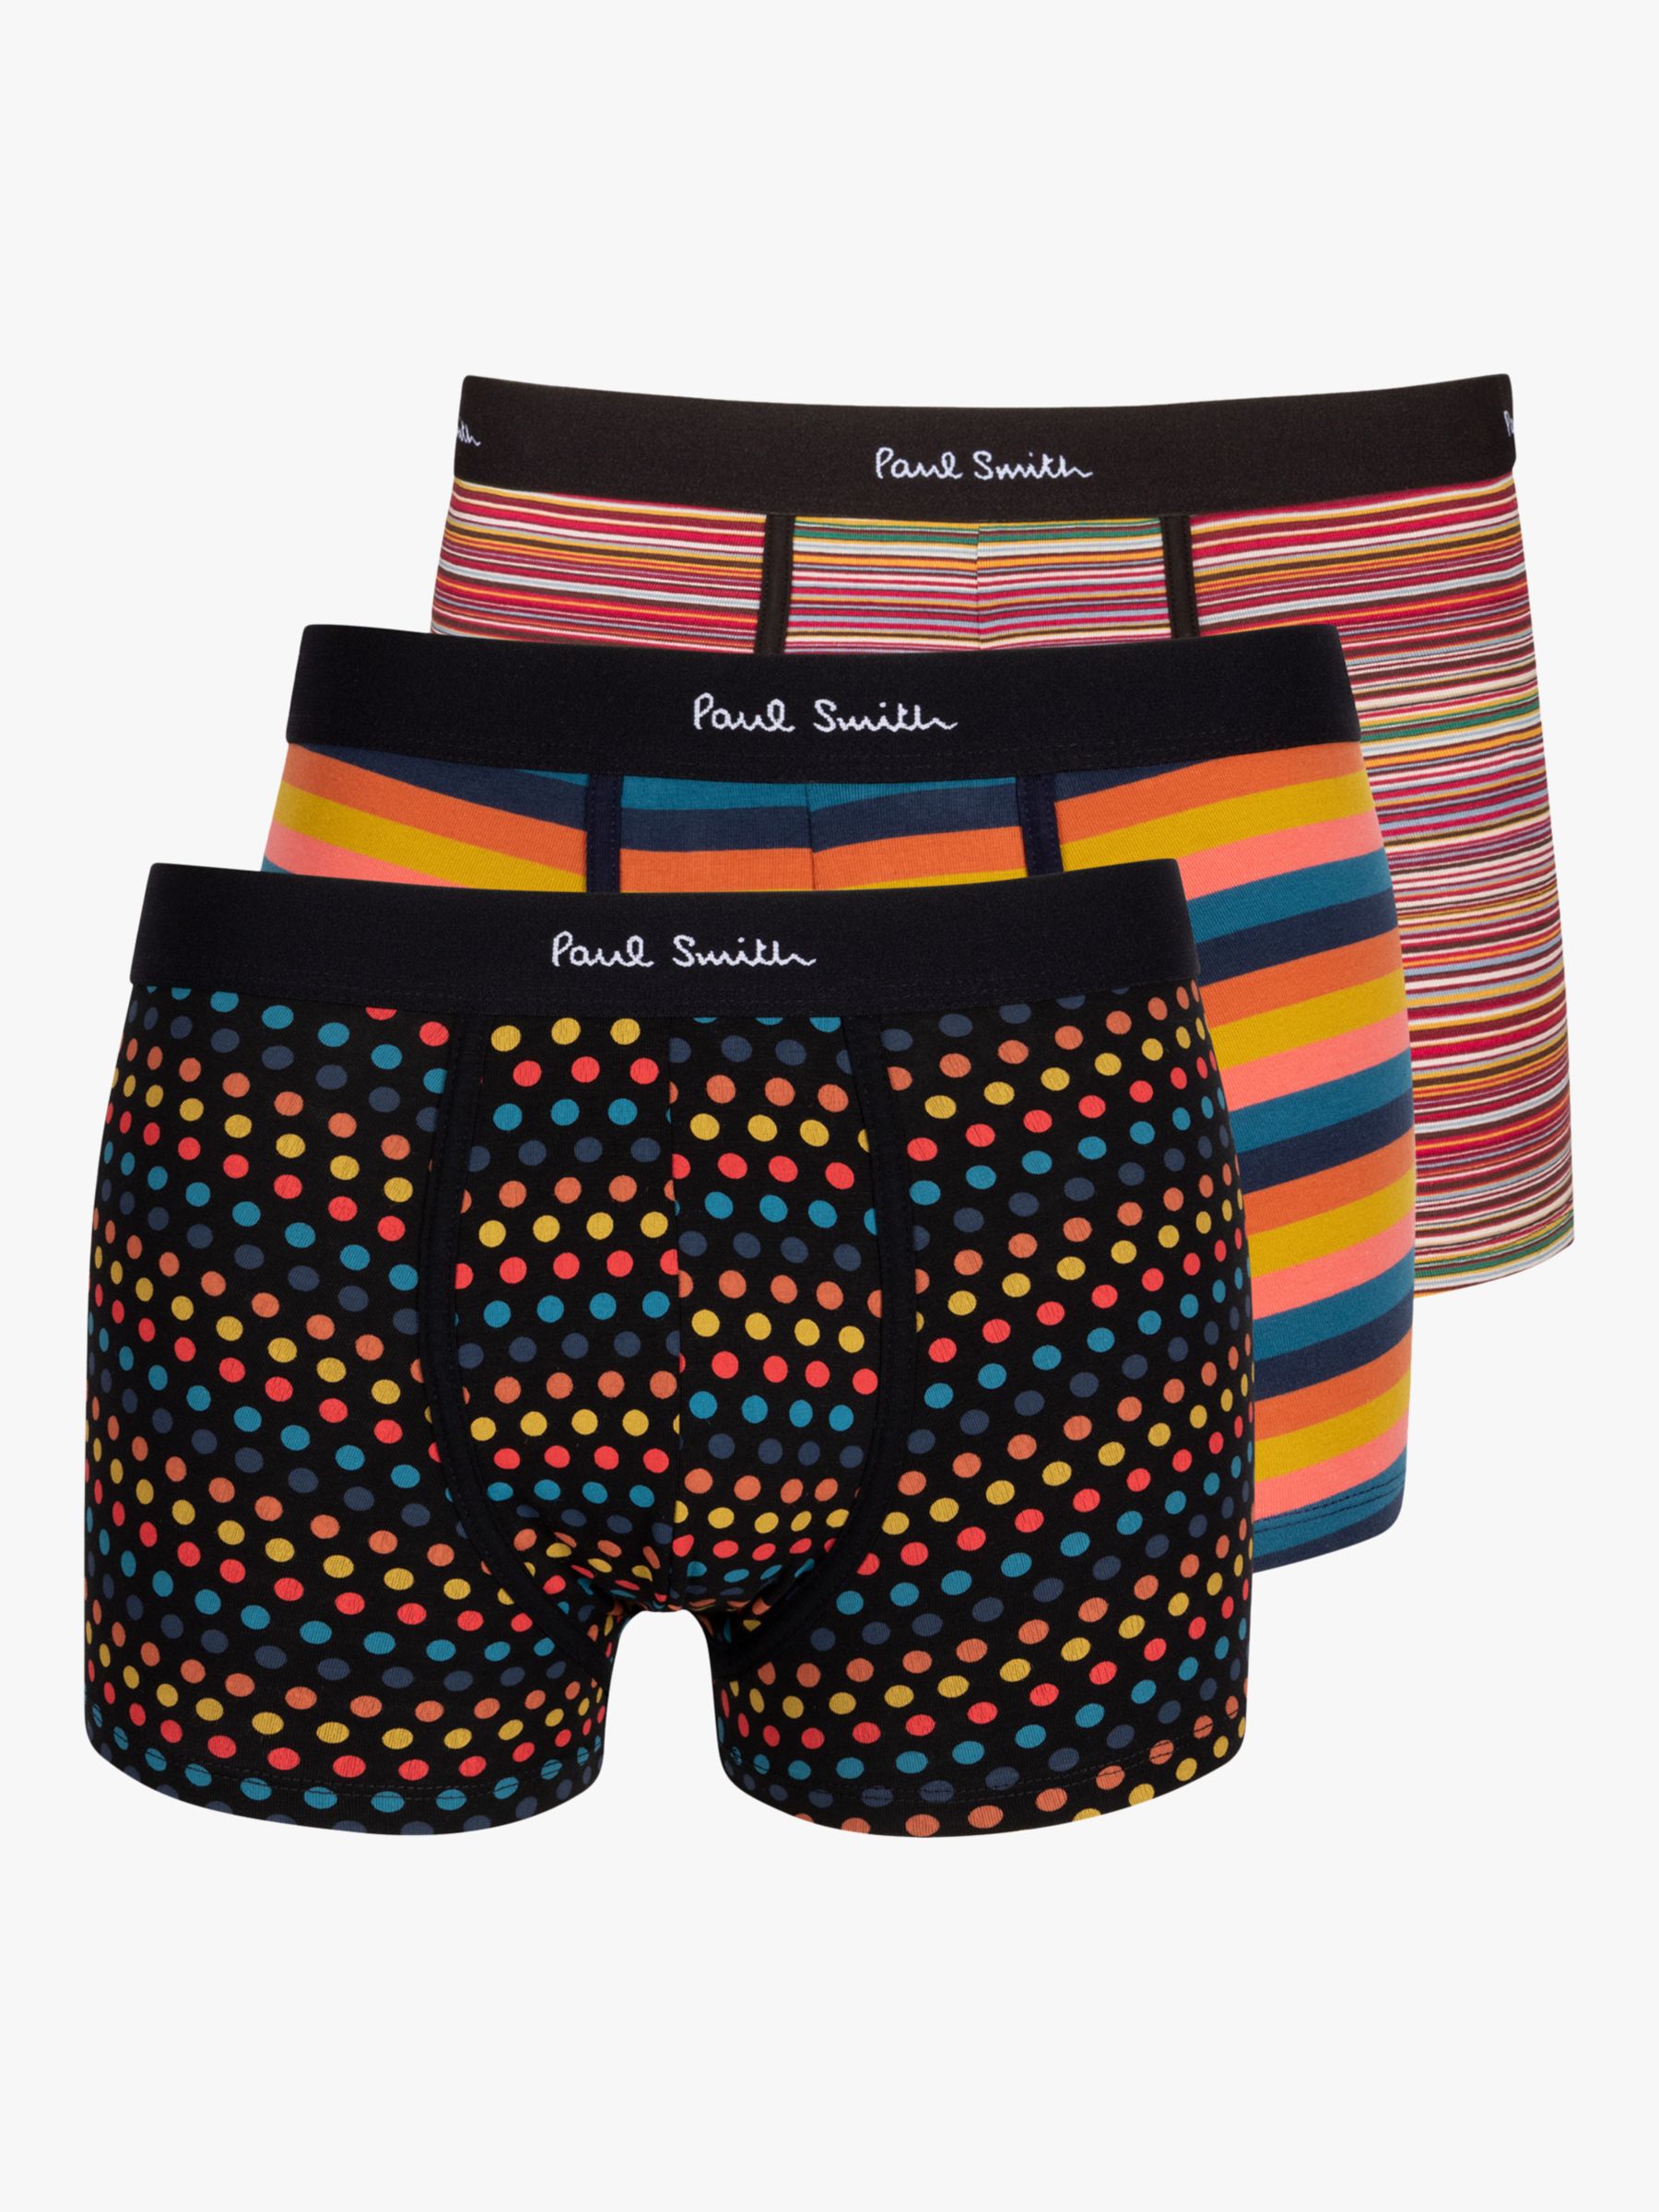  Golf Balls Men's Boxer Briefs Underwear Breathable Panty  Underpants : Clothing, Shoes & Jewelry